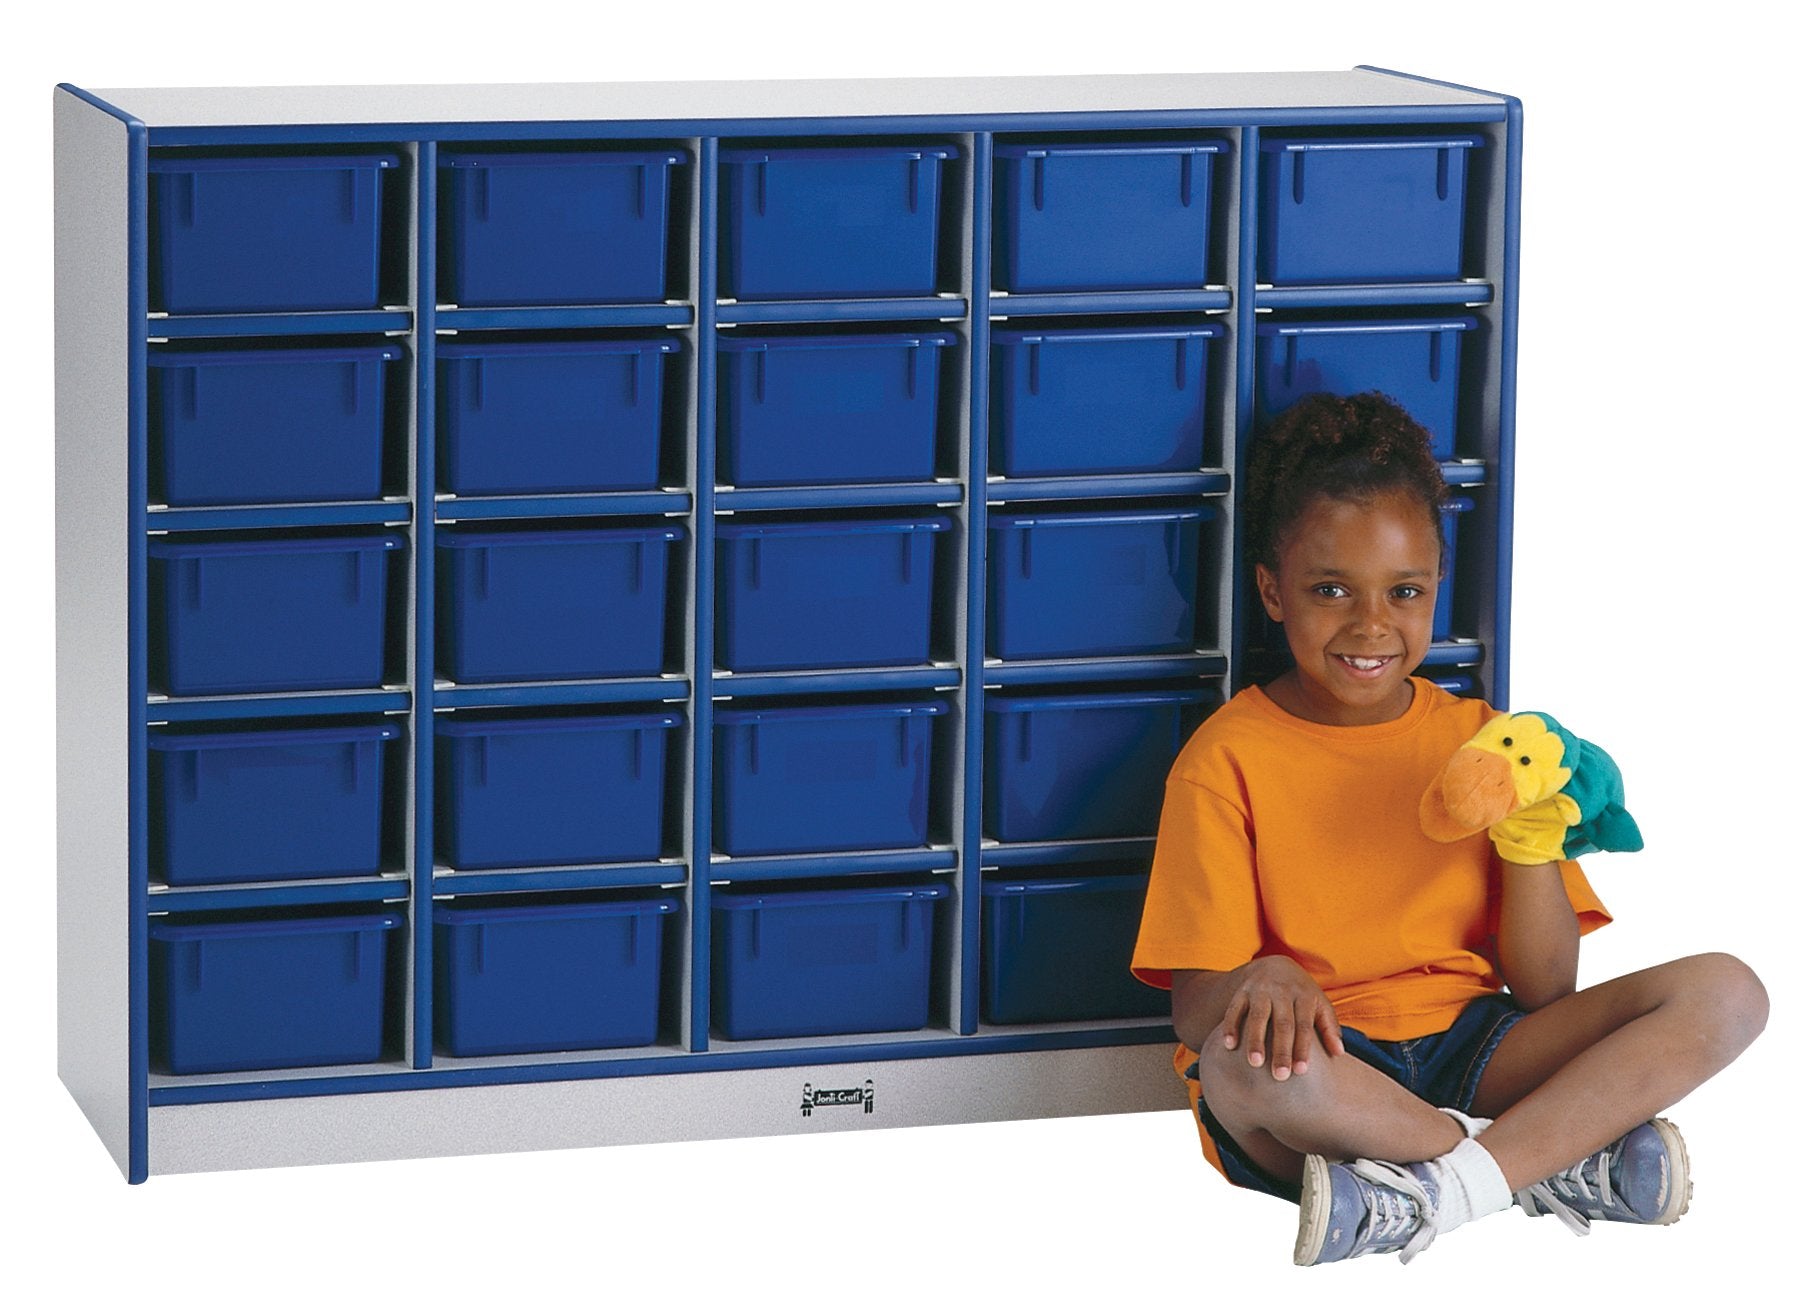 Rainbow AccentsÂ® 25 Cubbie-Tray Mobile Storage - without Trays - Navy